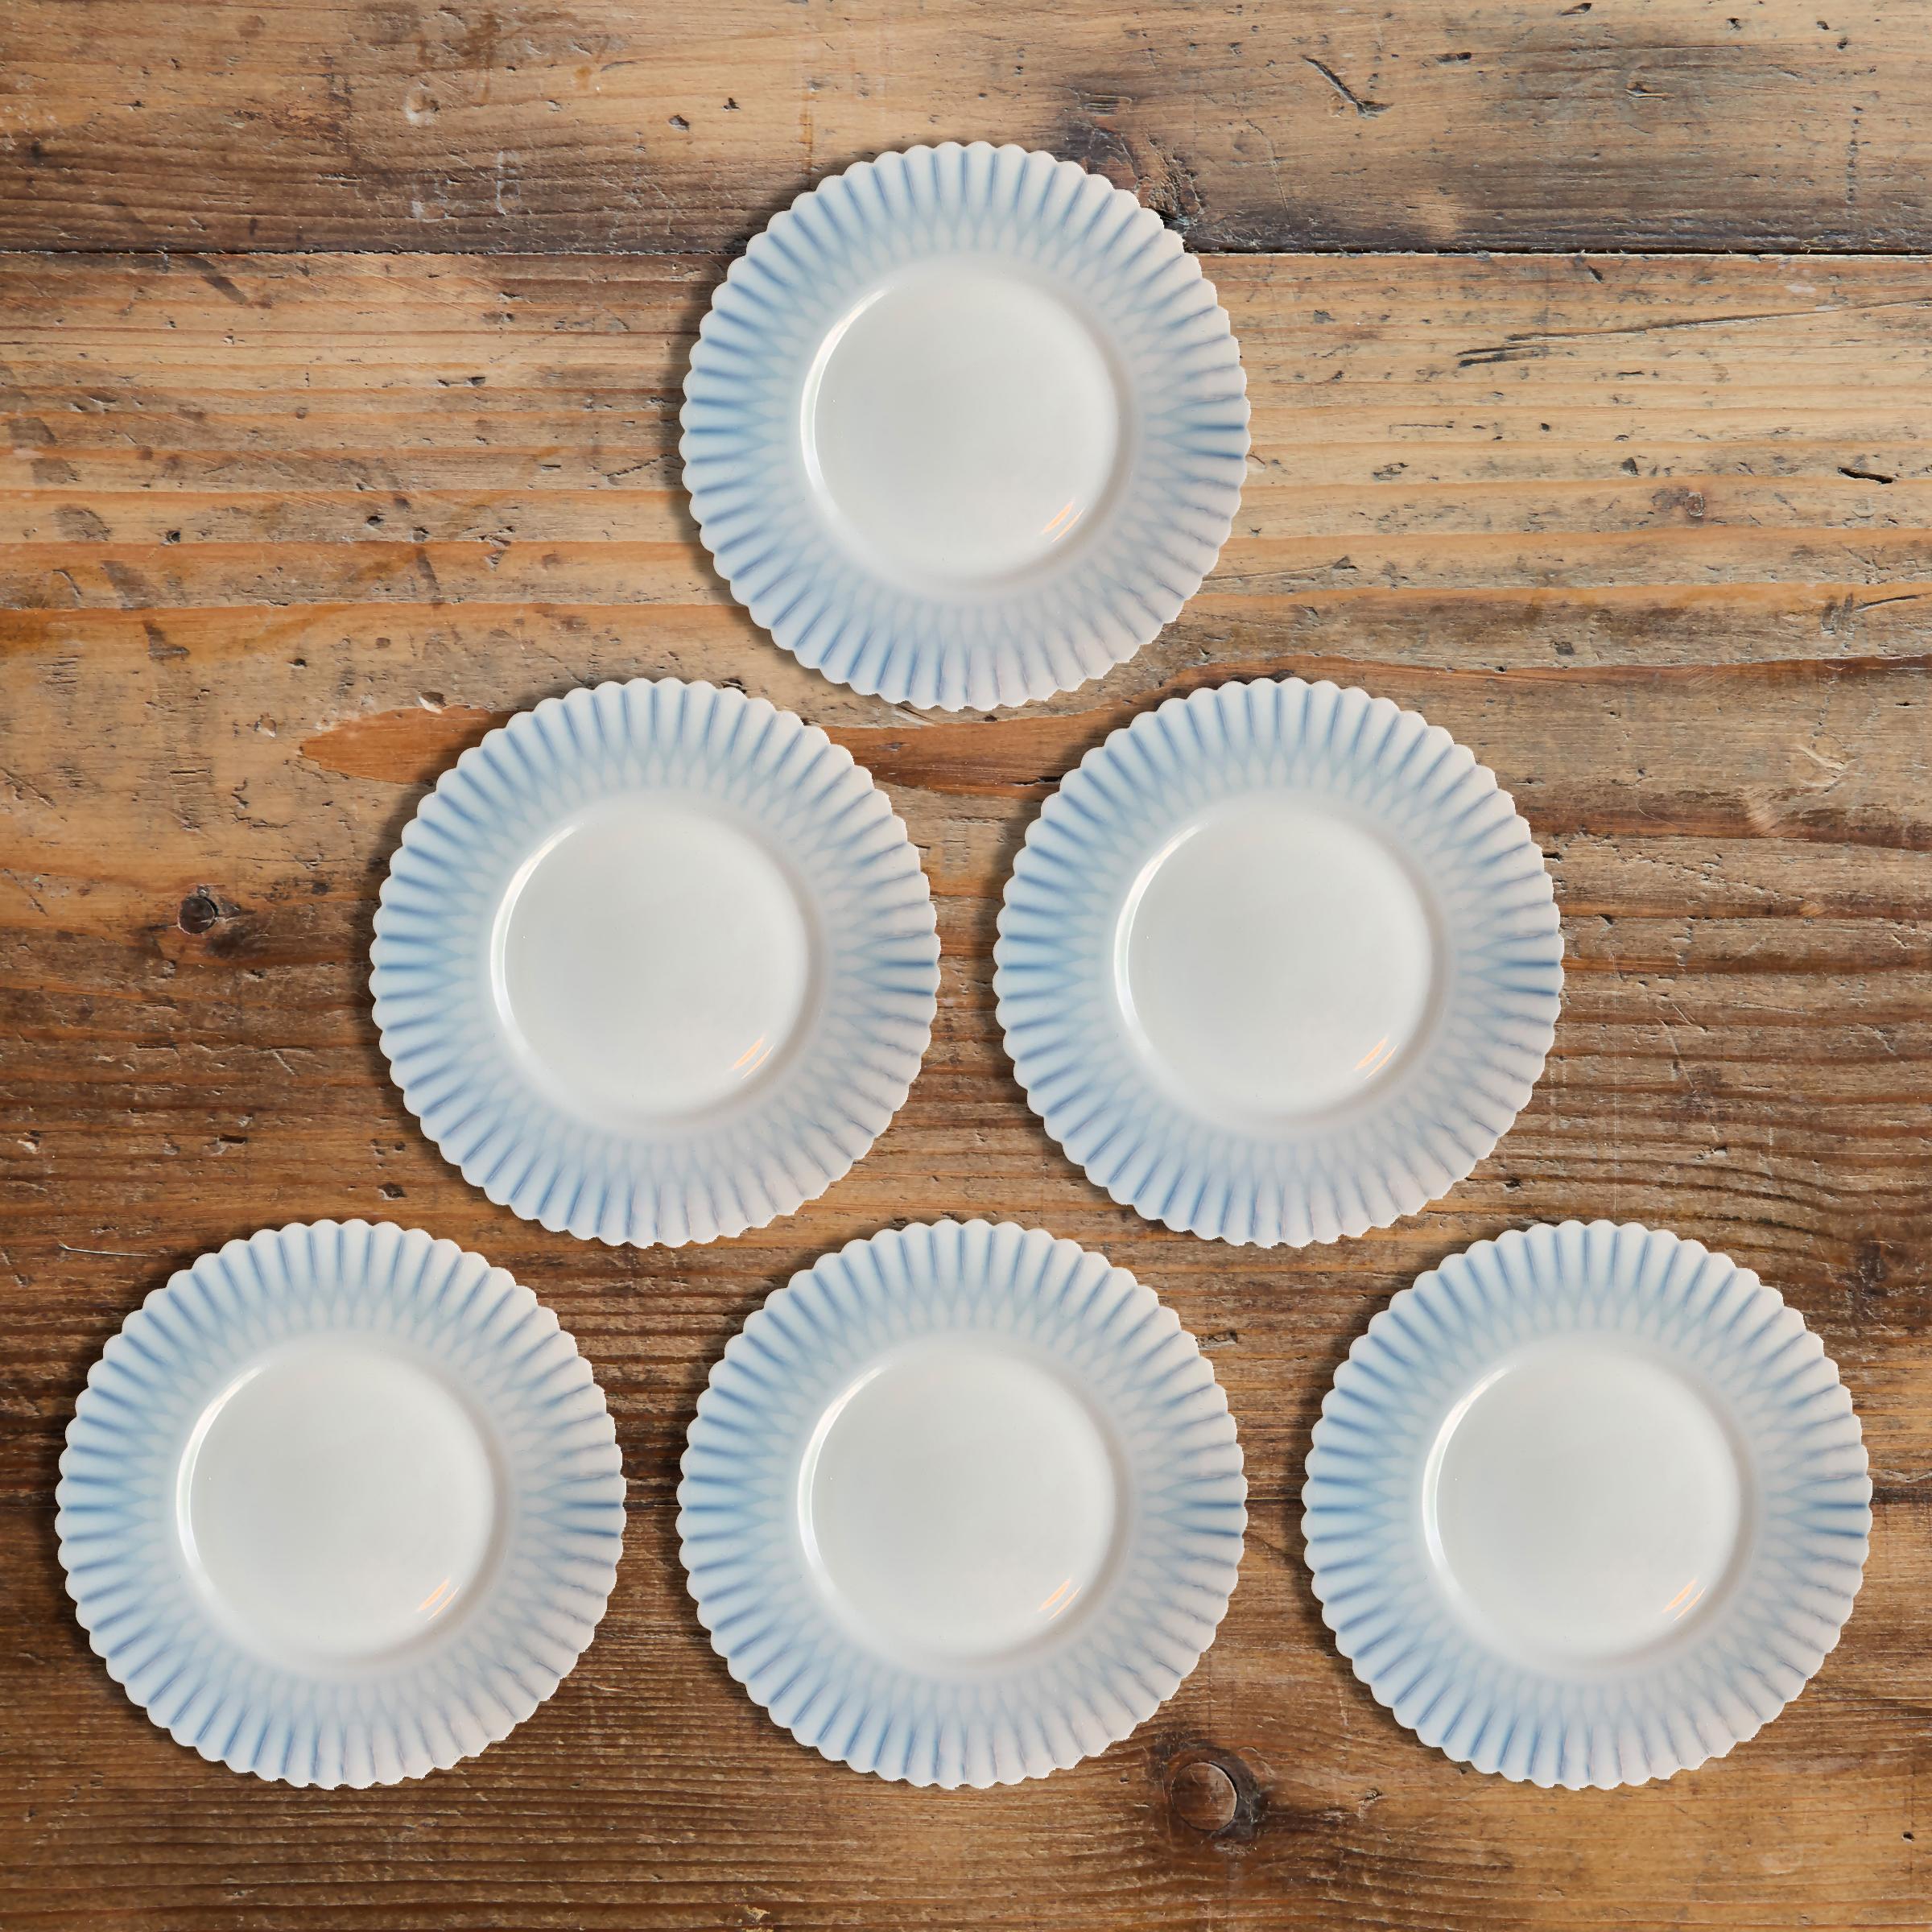 A wonderful sweet of six early 20th century American translucent opaline glass dessert plates with scalloped edges.